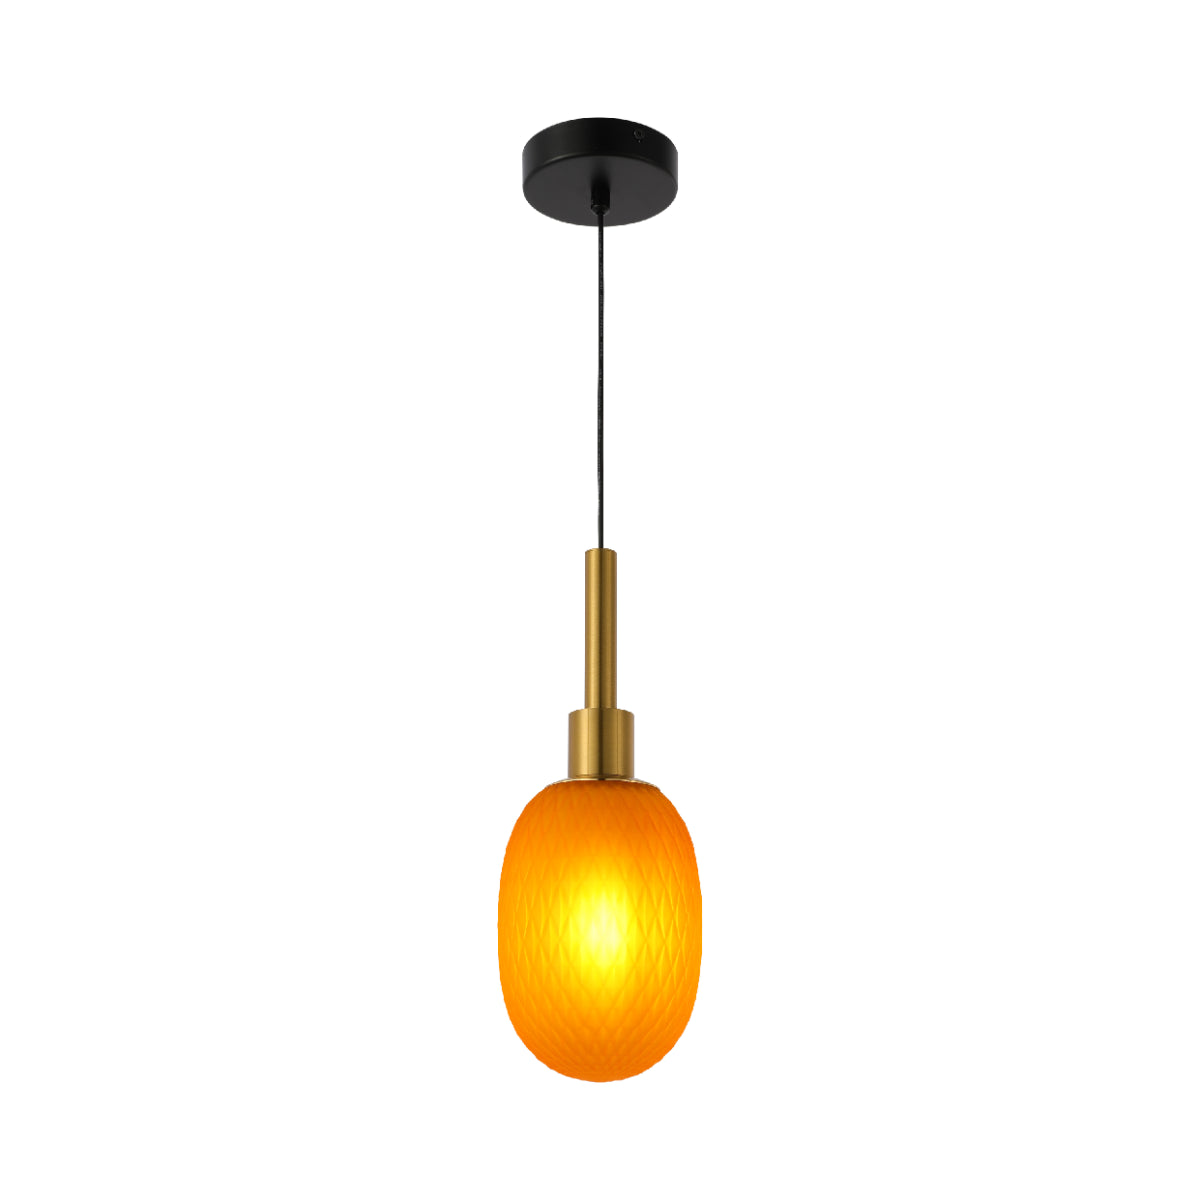 Main image of Opalescent Ellipsoid Pendant Light with Gold Detail 150-19024